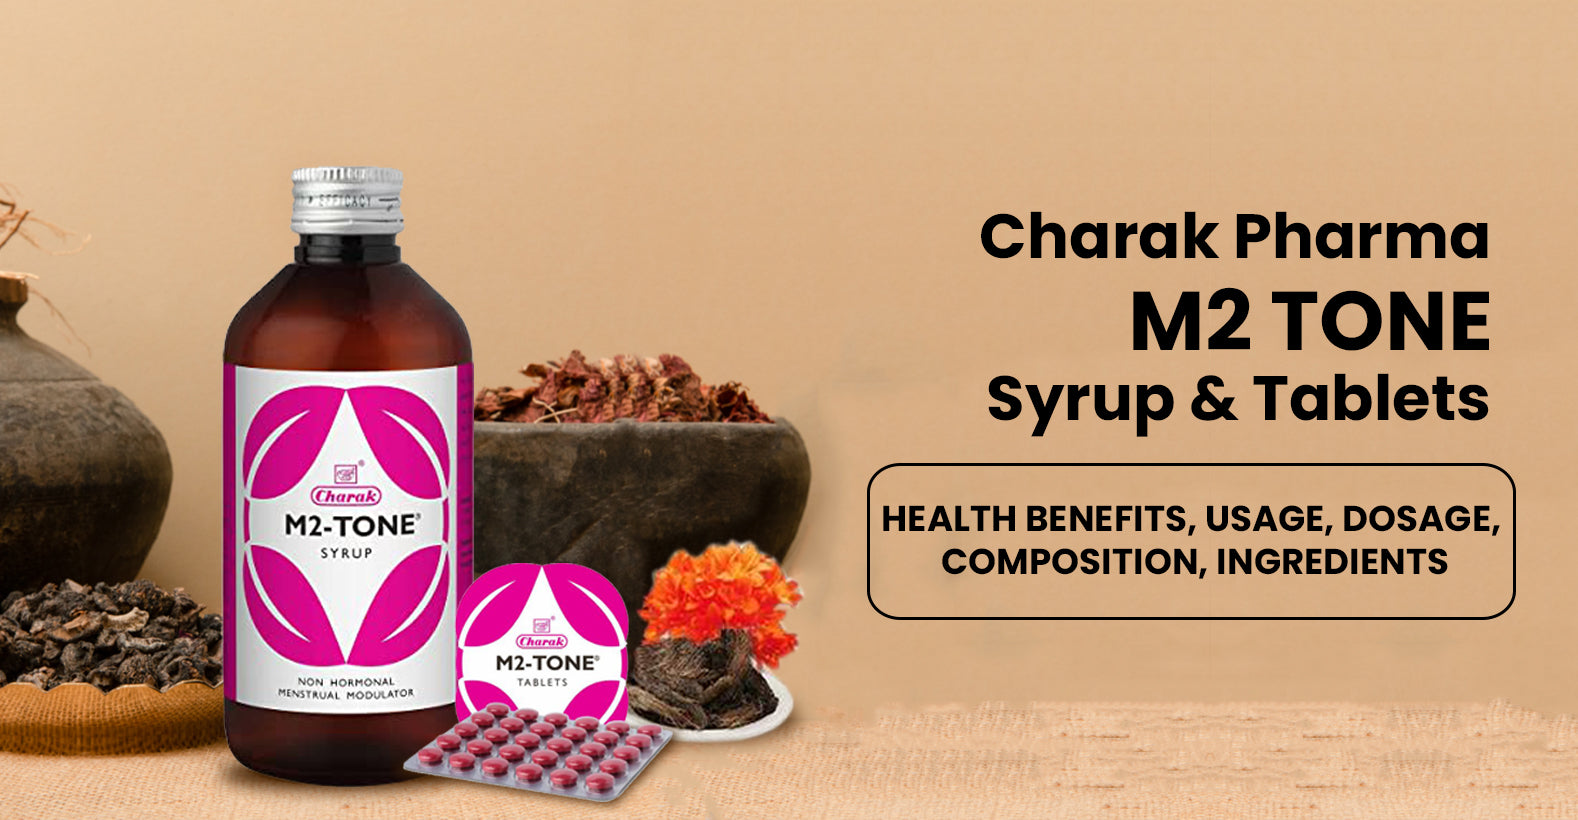 M2 Tone Syrup and Tablets – Ingredients, Properties, Health Benefits, Usage, Dosage, Tips